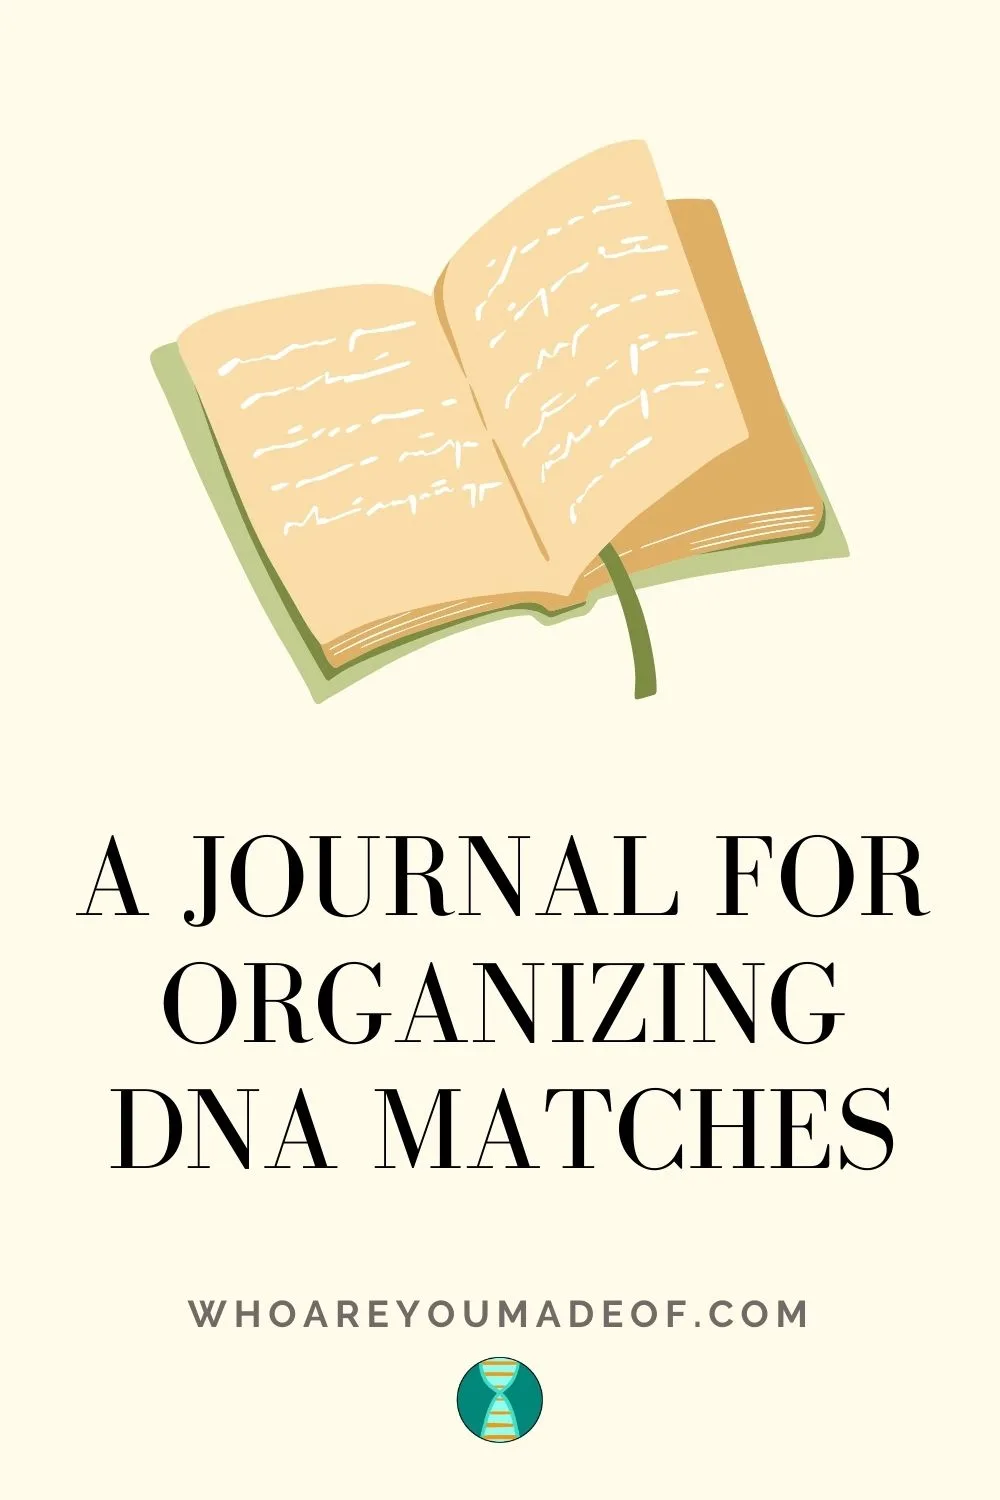 Image with a journal depicting the subject of the post, which is a journal for organizing DNA matches - optimized for size and pinterest